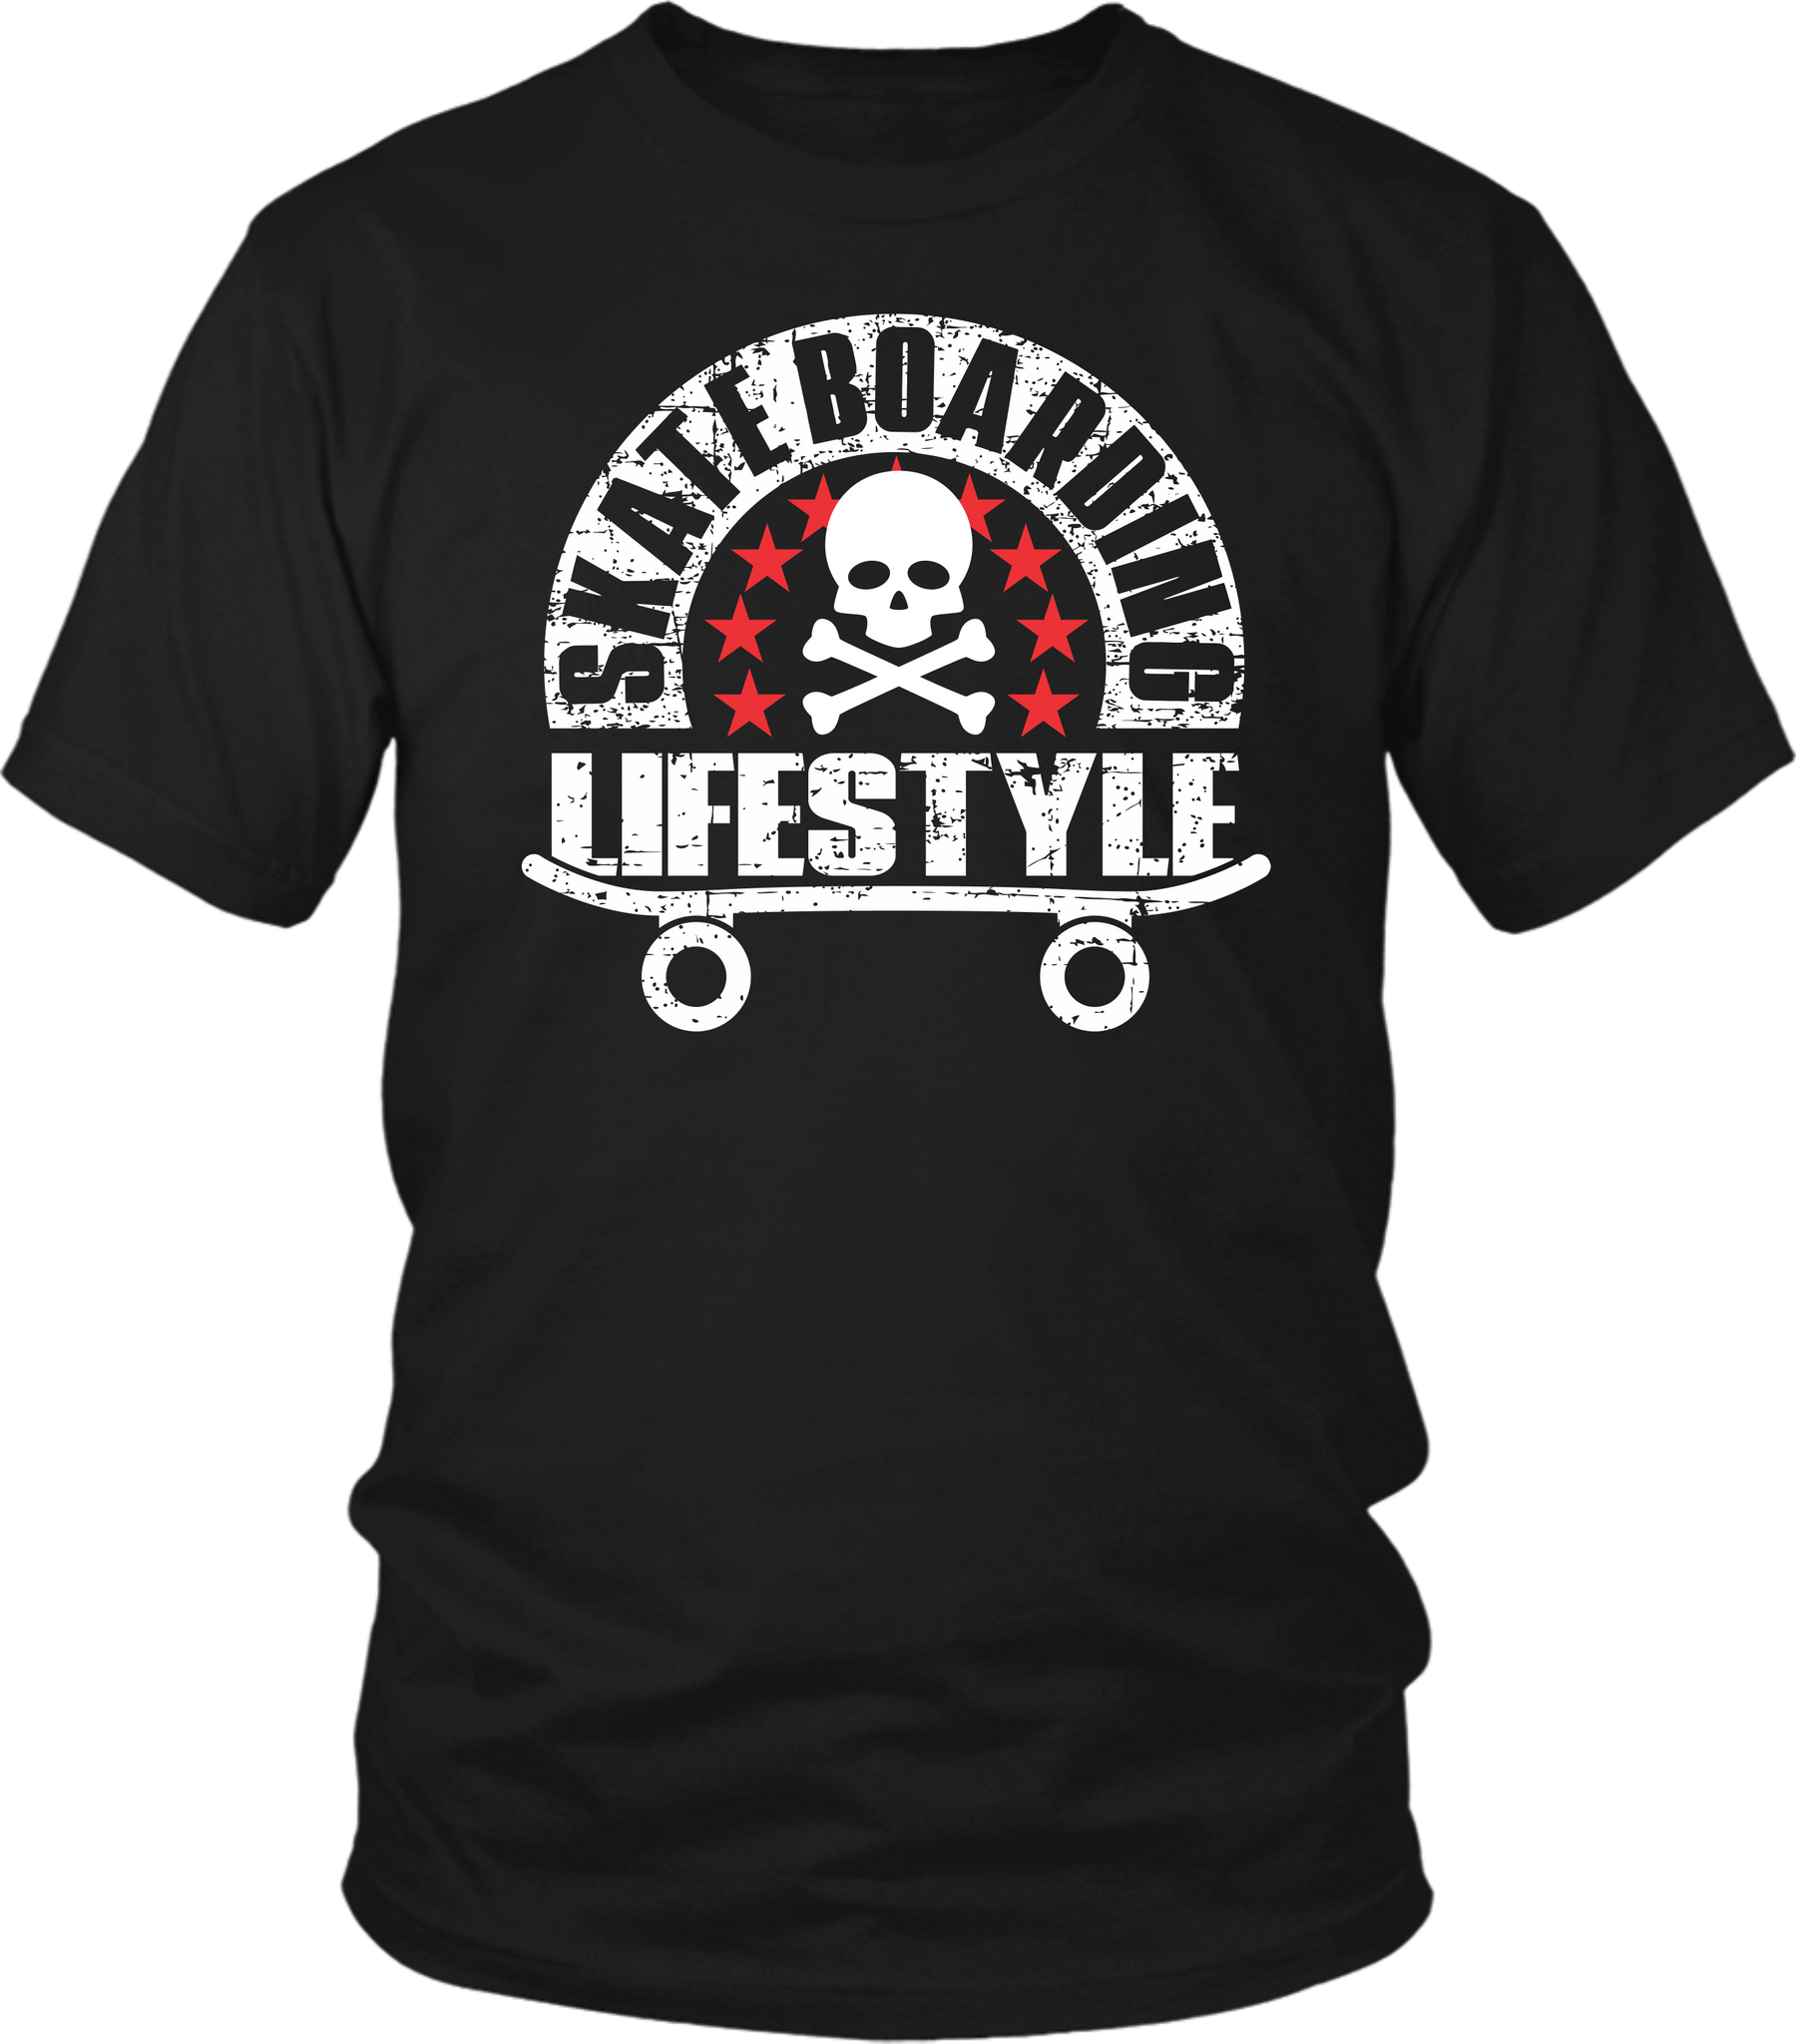 Black Male T-shirt Mock-up with "Skateboarding Lifestyle" grunge design on the front, available from the Xpert Apparel Store